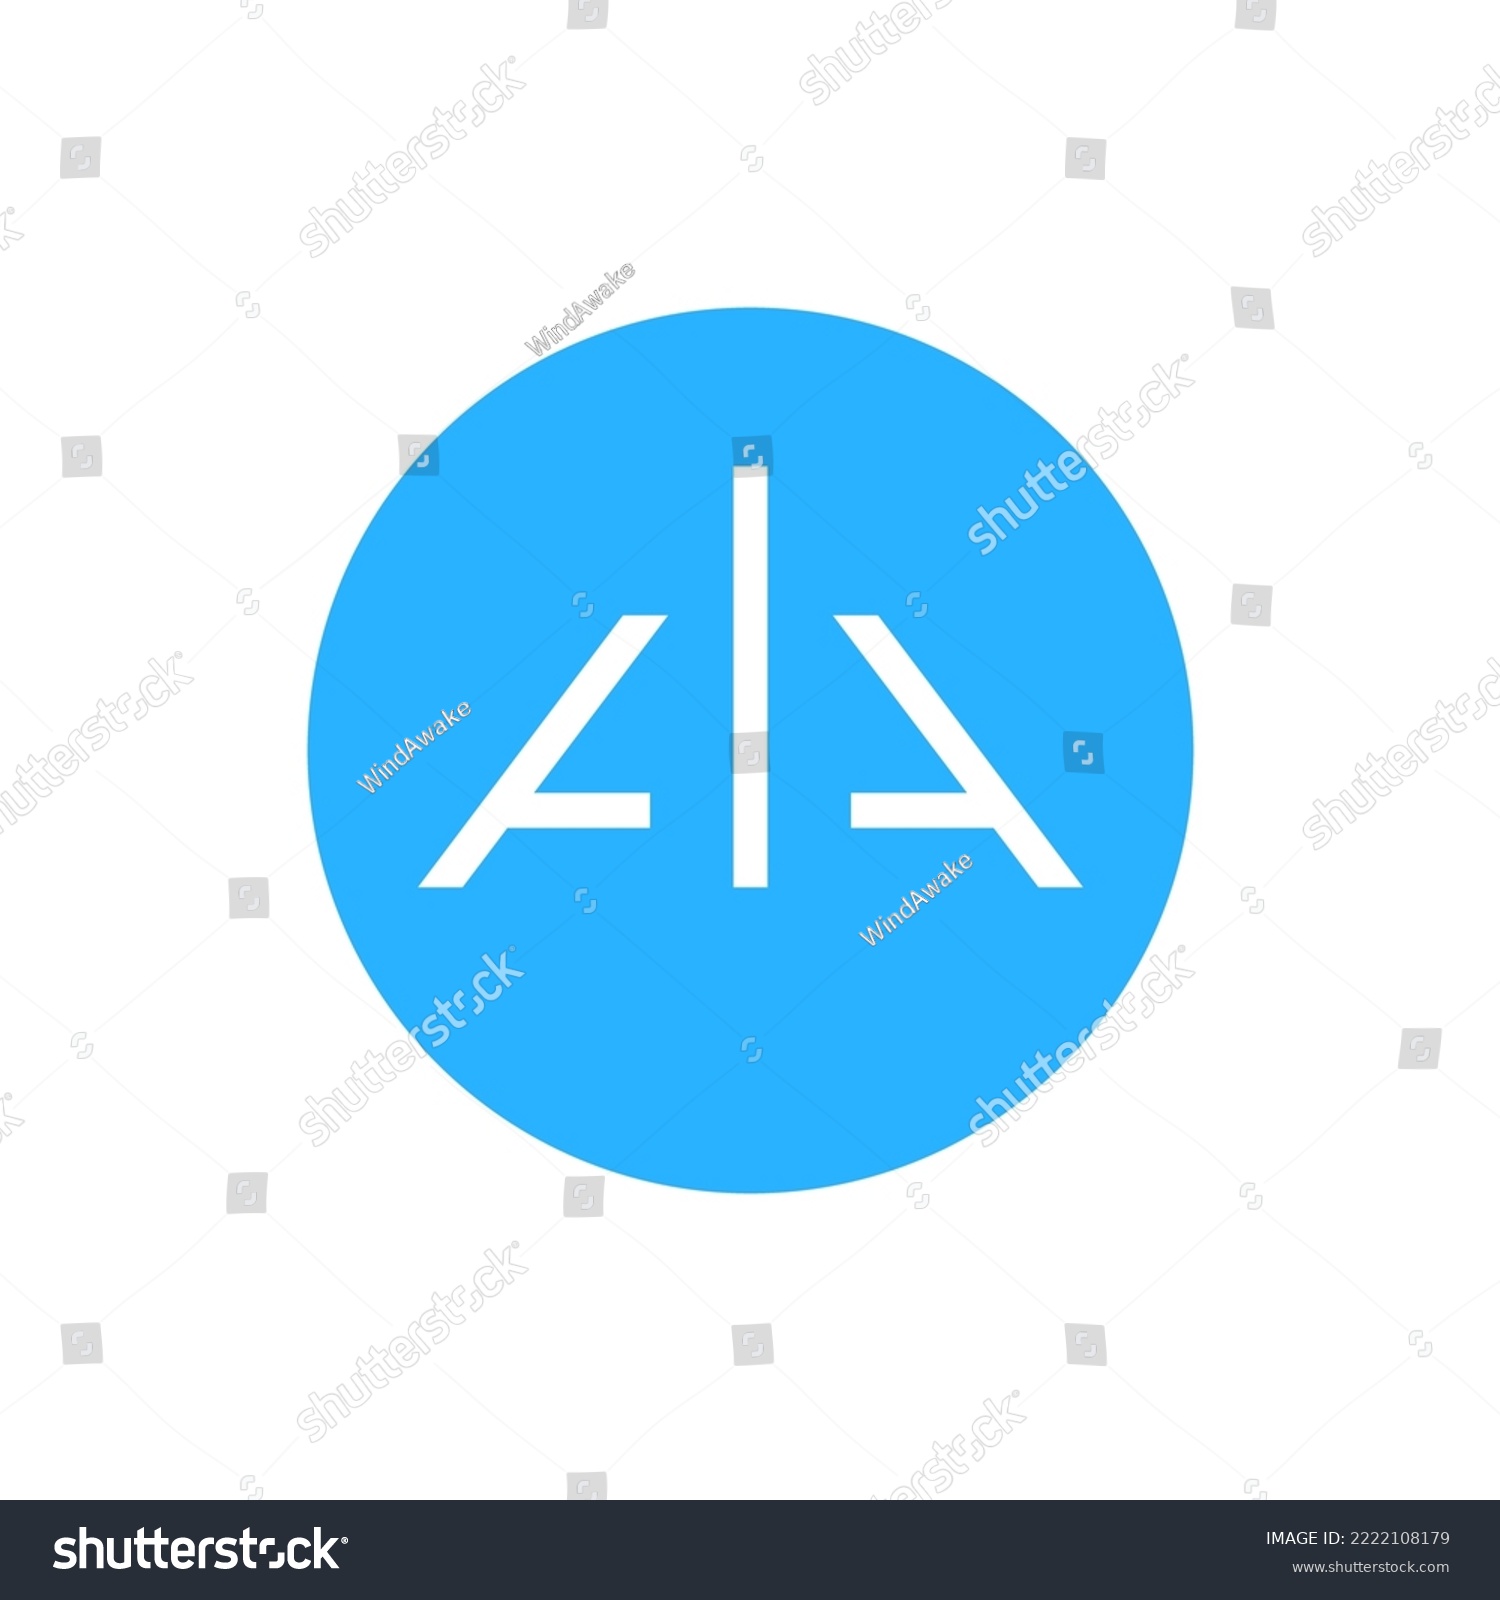 SVG of Alpha Finance Lab (ALPHA) icon isolated on white background. svg